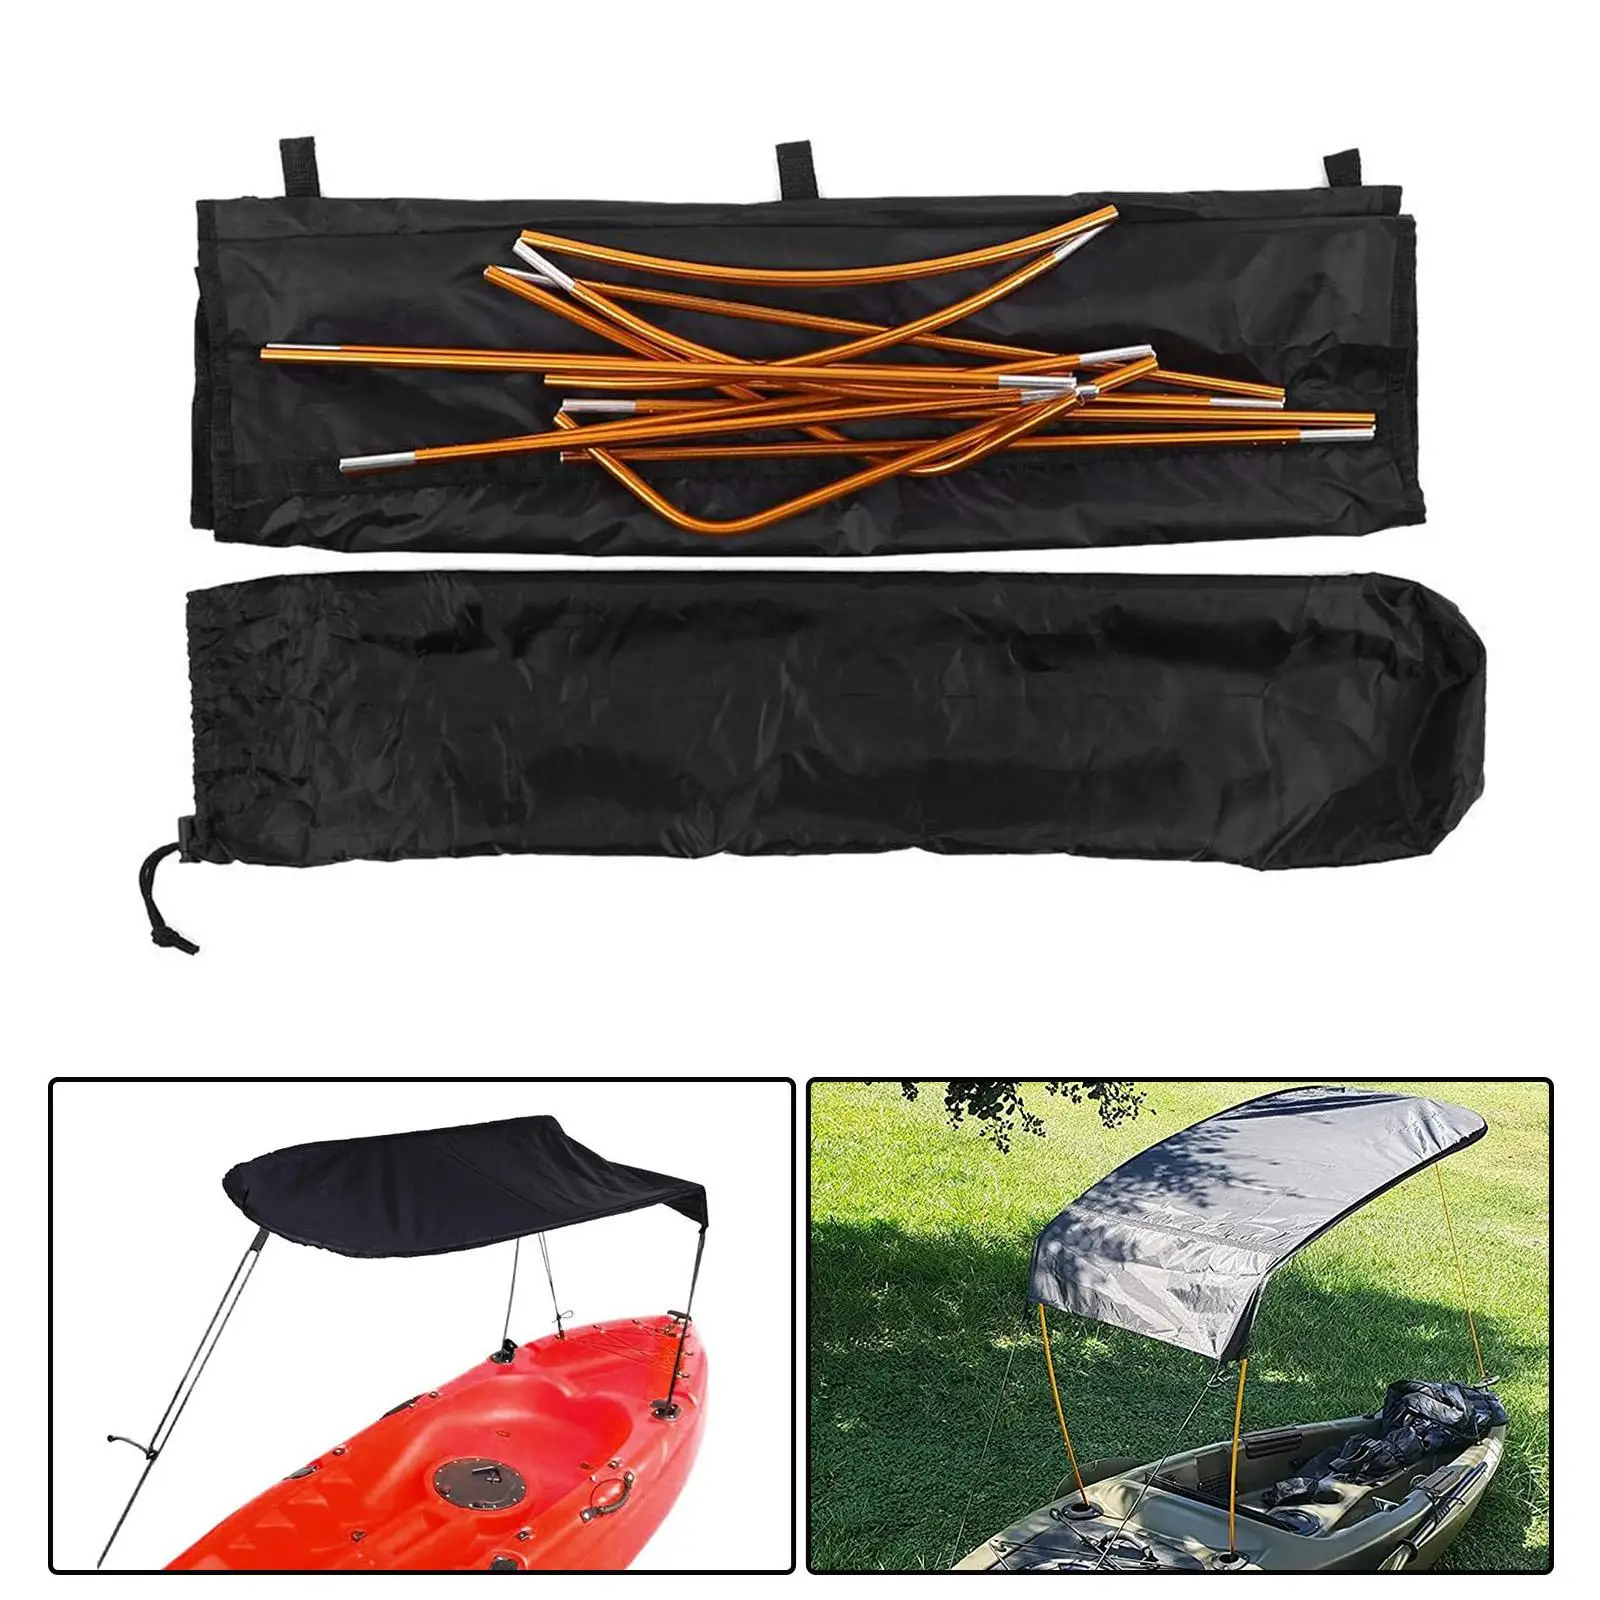 Rainproof Boat Sun Shelter Awning Top Cover Canopy Tent Portable for Picnic Water Sports Rafting Accessorie Canoe Sailboat